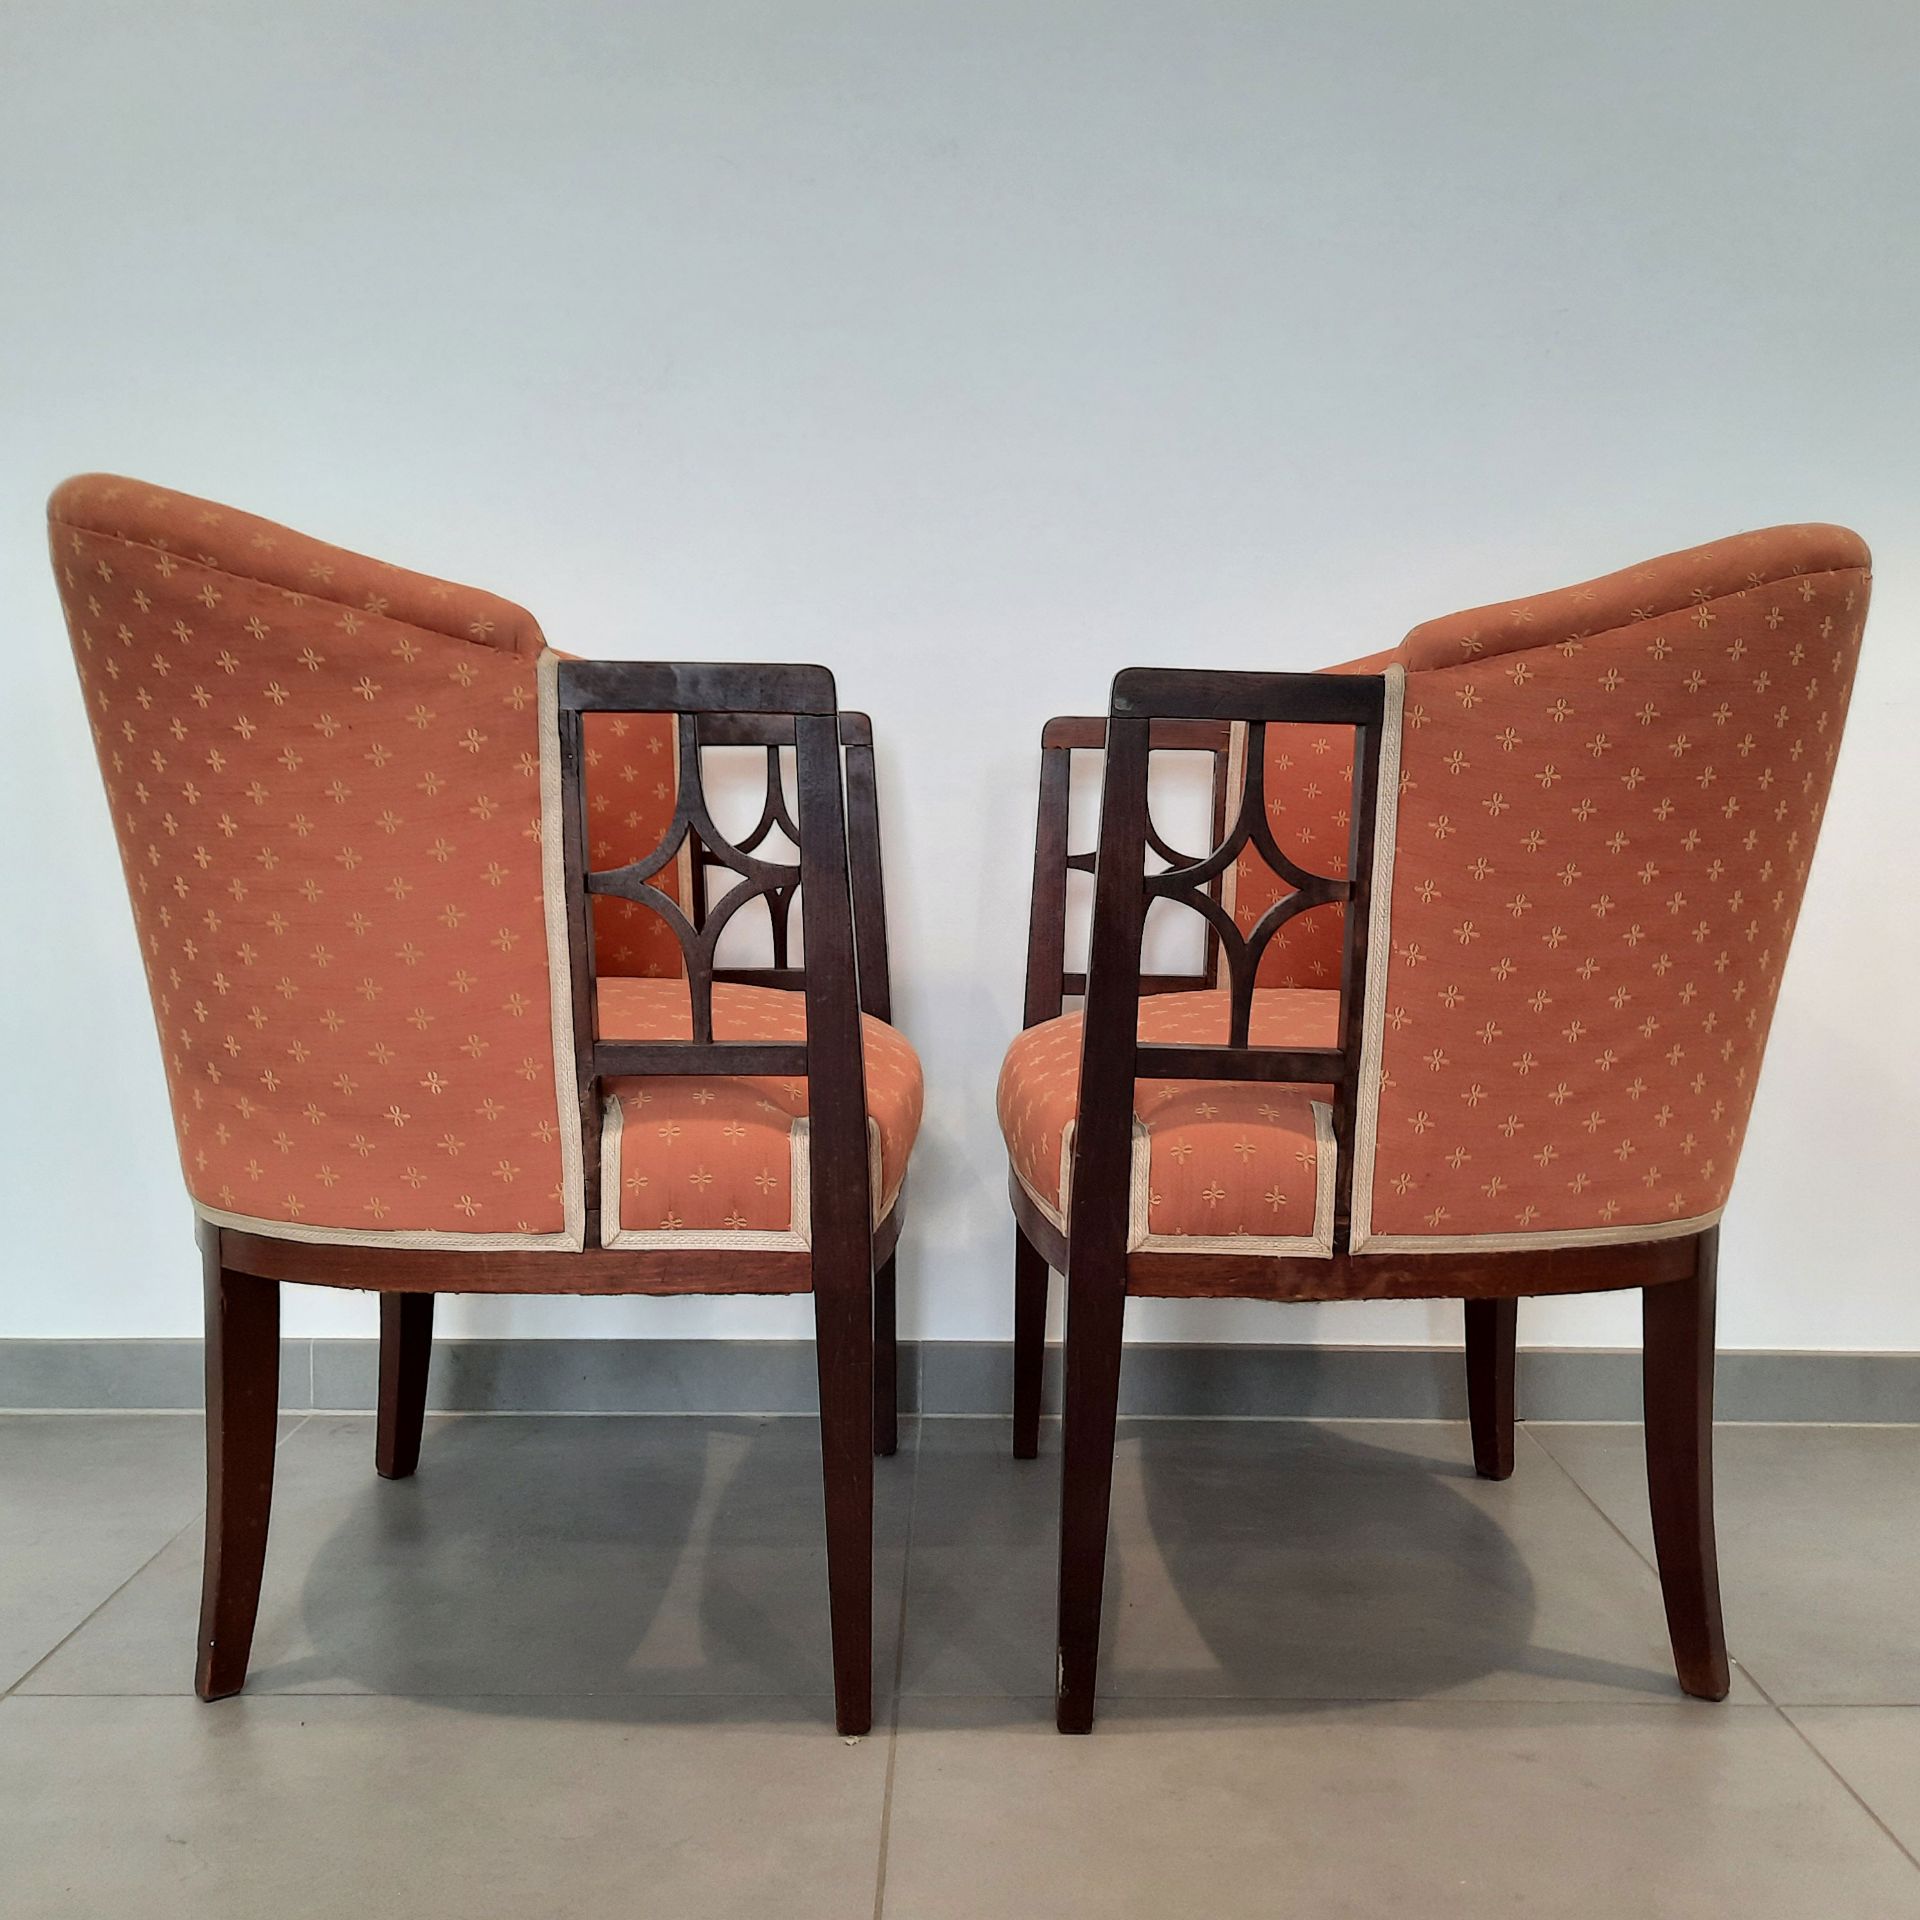 Leon SNEYERS (1877-1949) pair of armchairs - Image 3 of 3